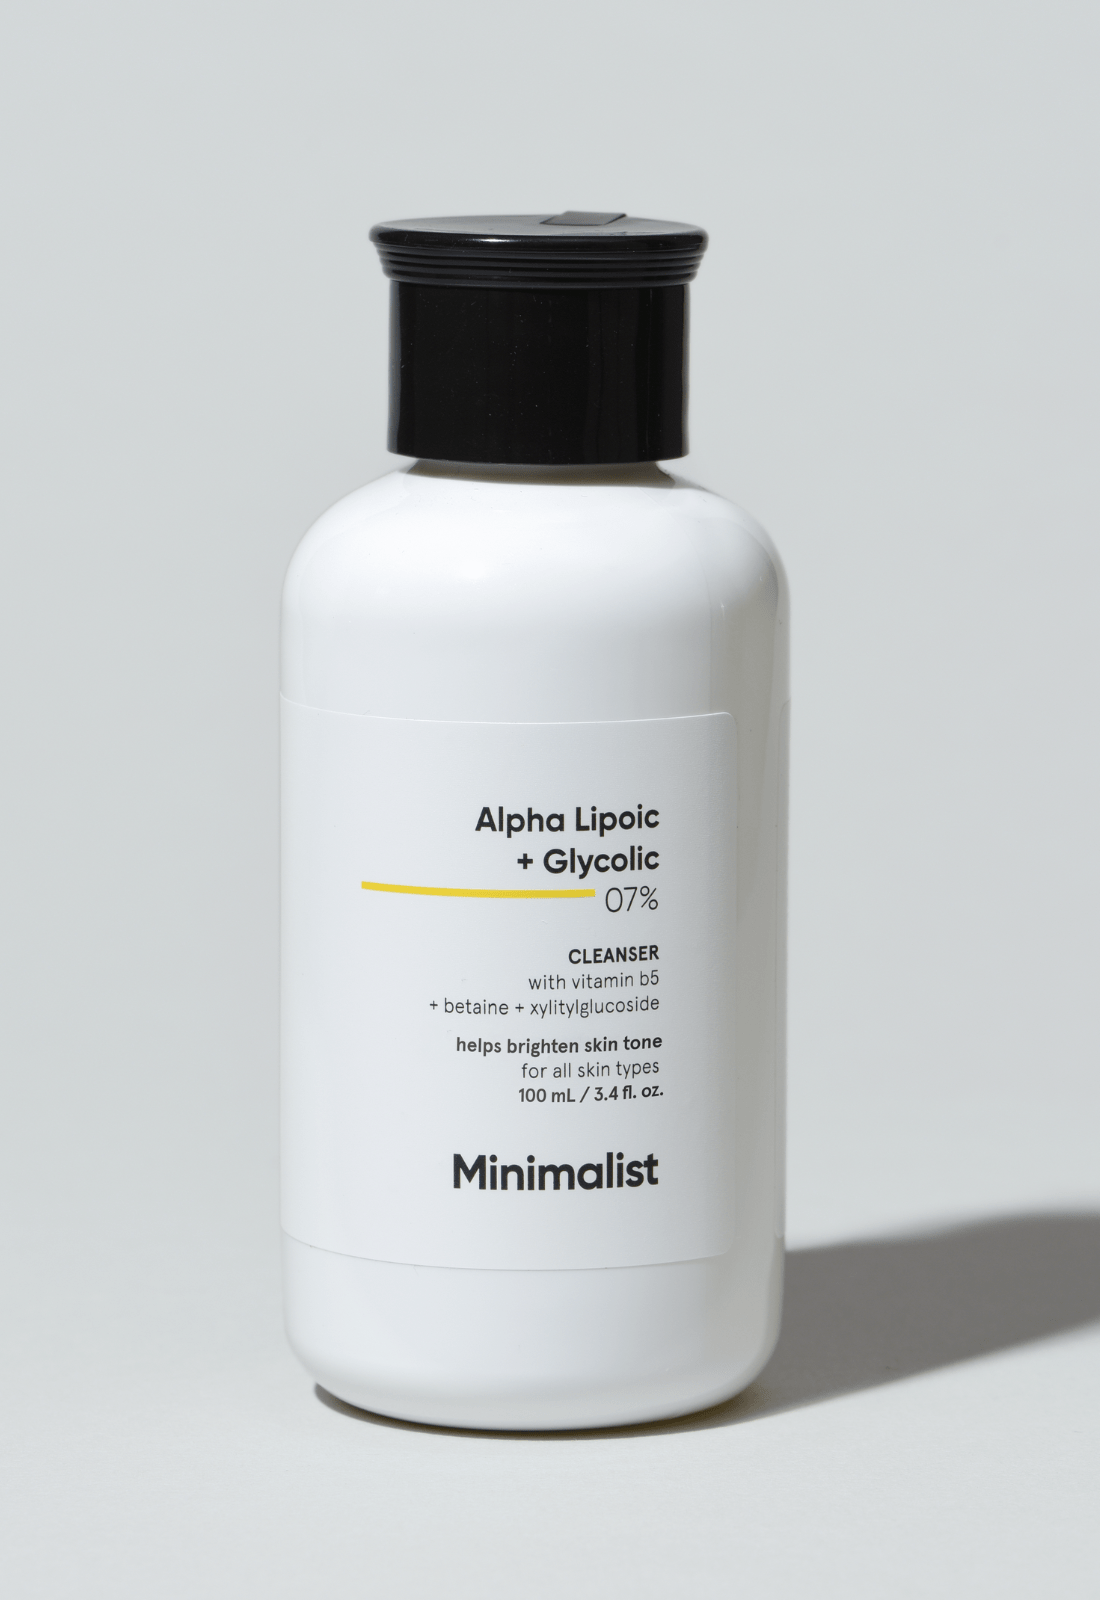 Alpha Lipoic + Glycolic 07% Cleanser for Making Dull Skin Look Bright &  Glowy - Brightening Cleanser